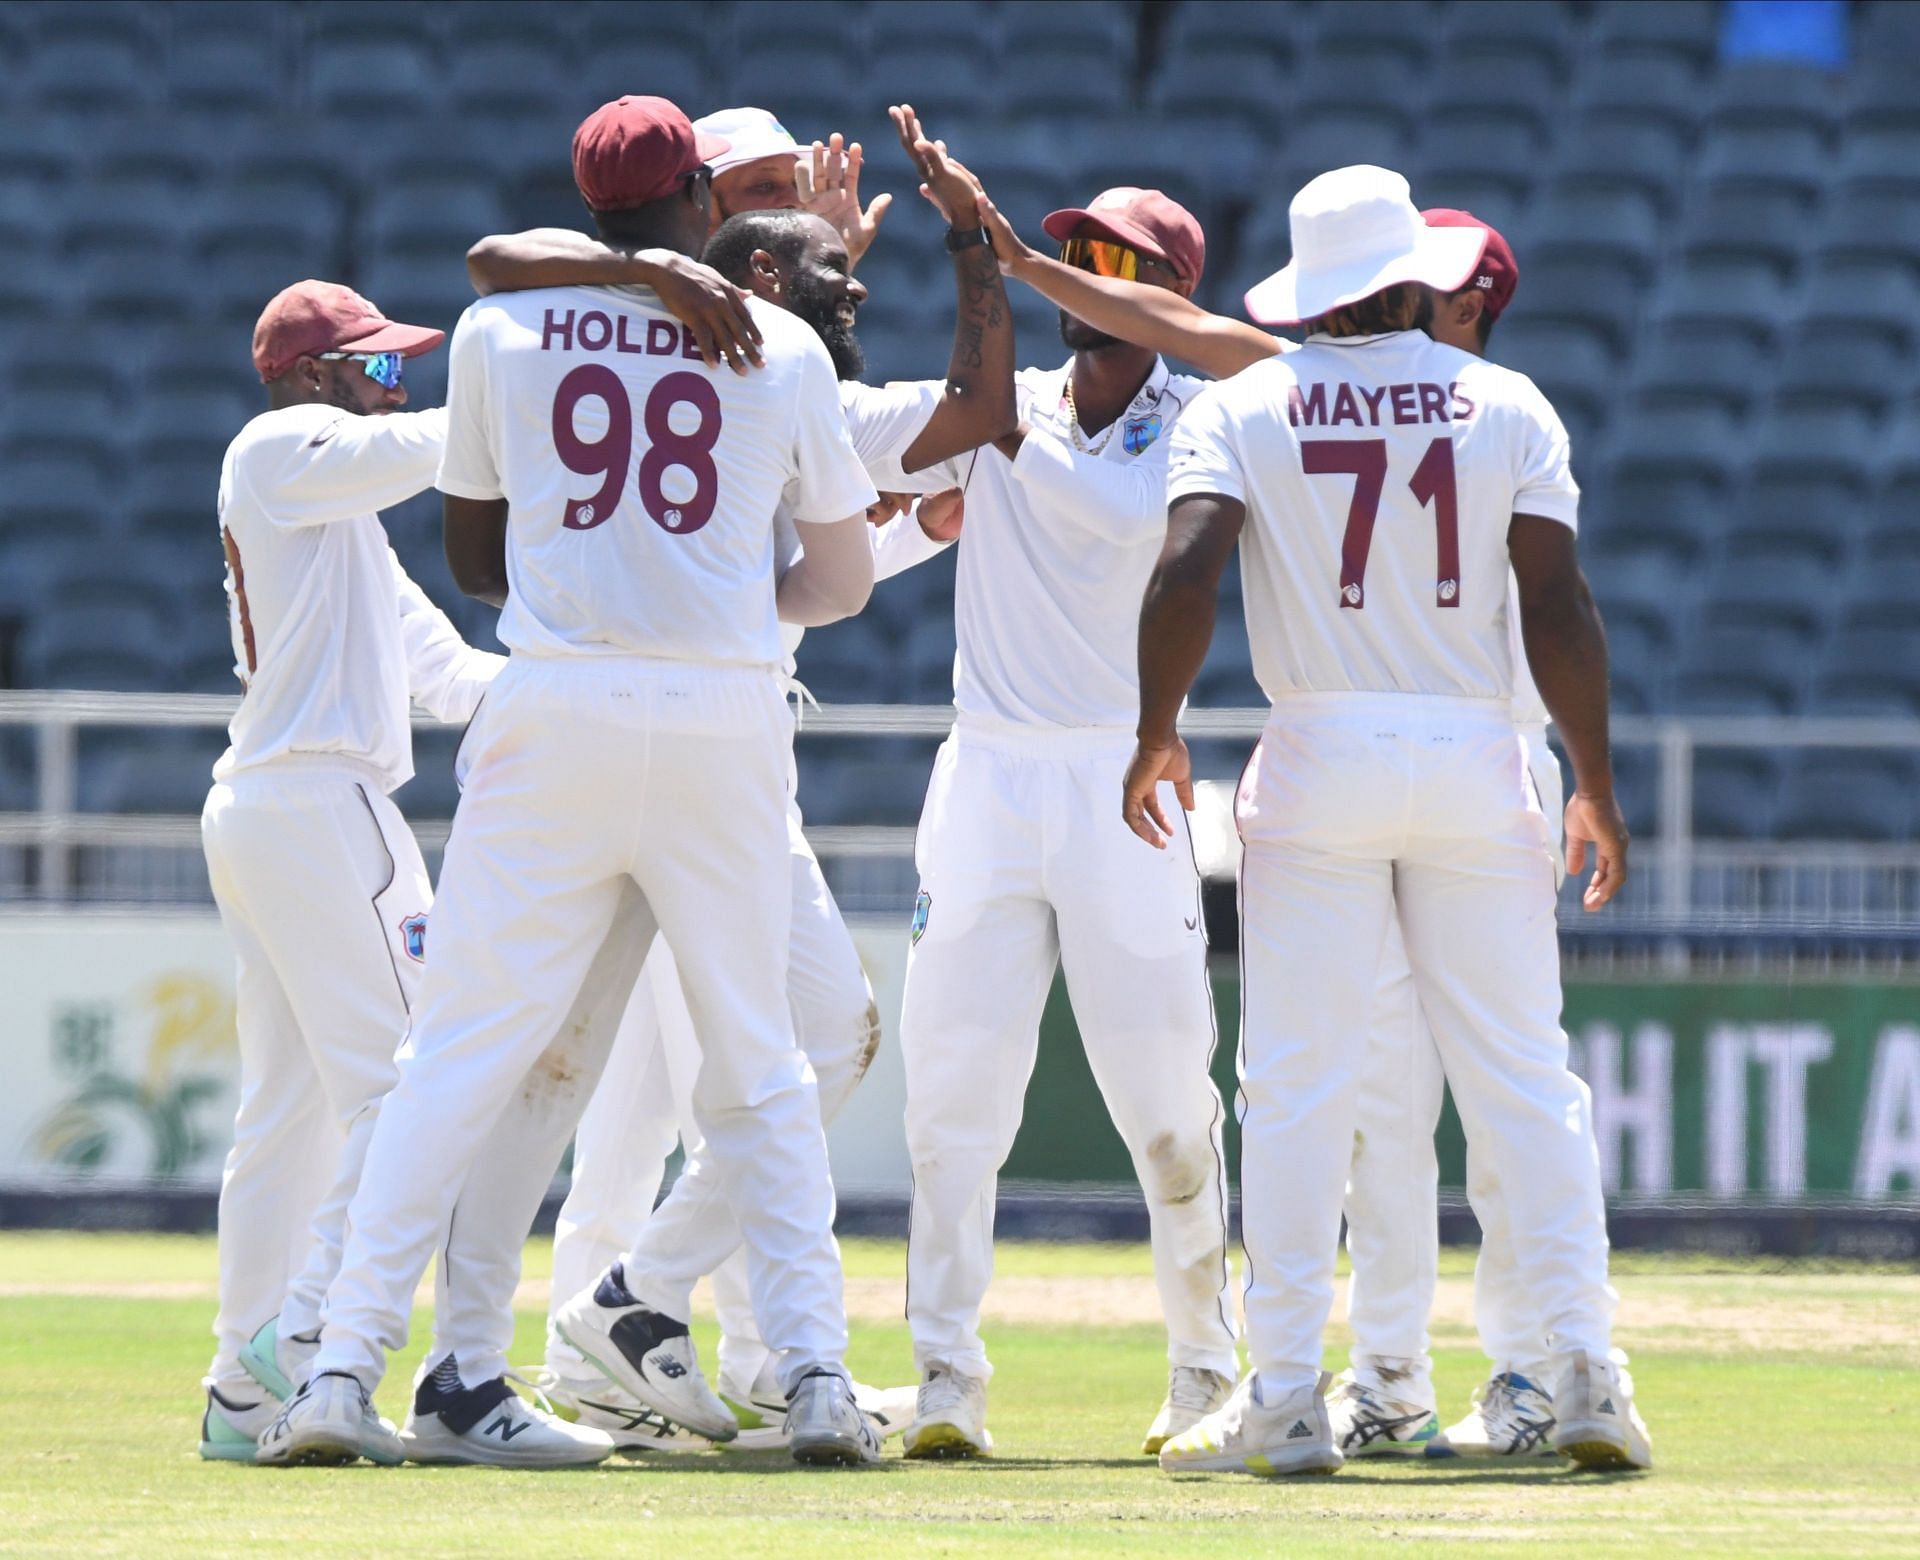 South Africa v West Indies - 2nd Test Match